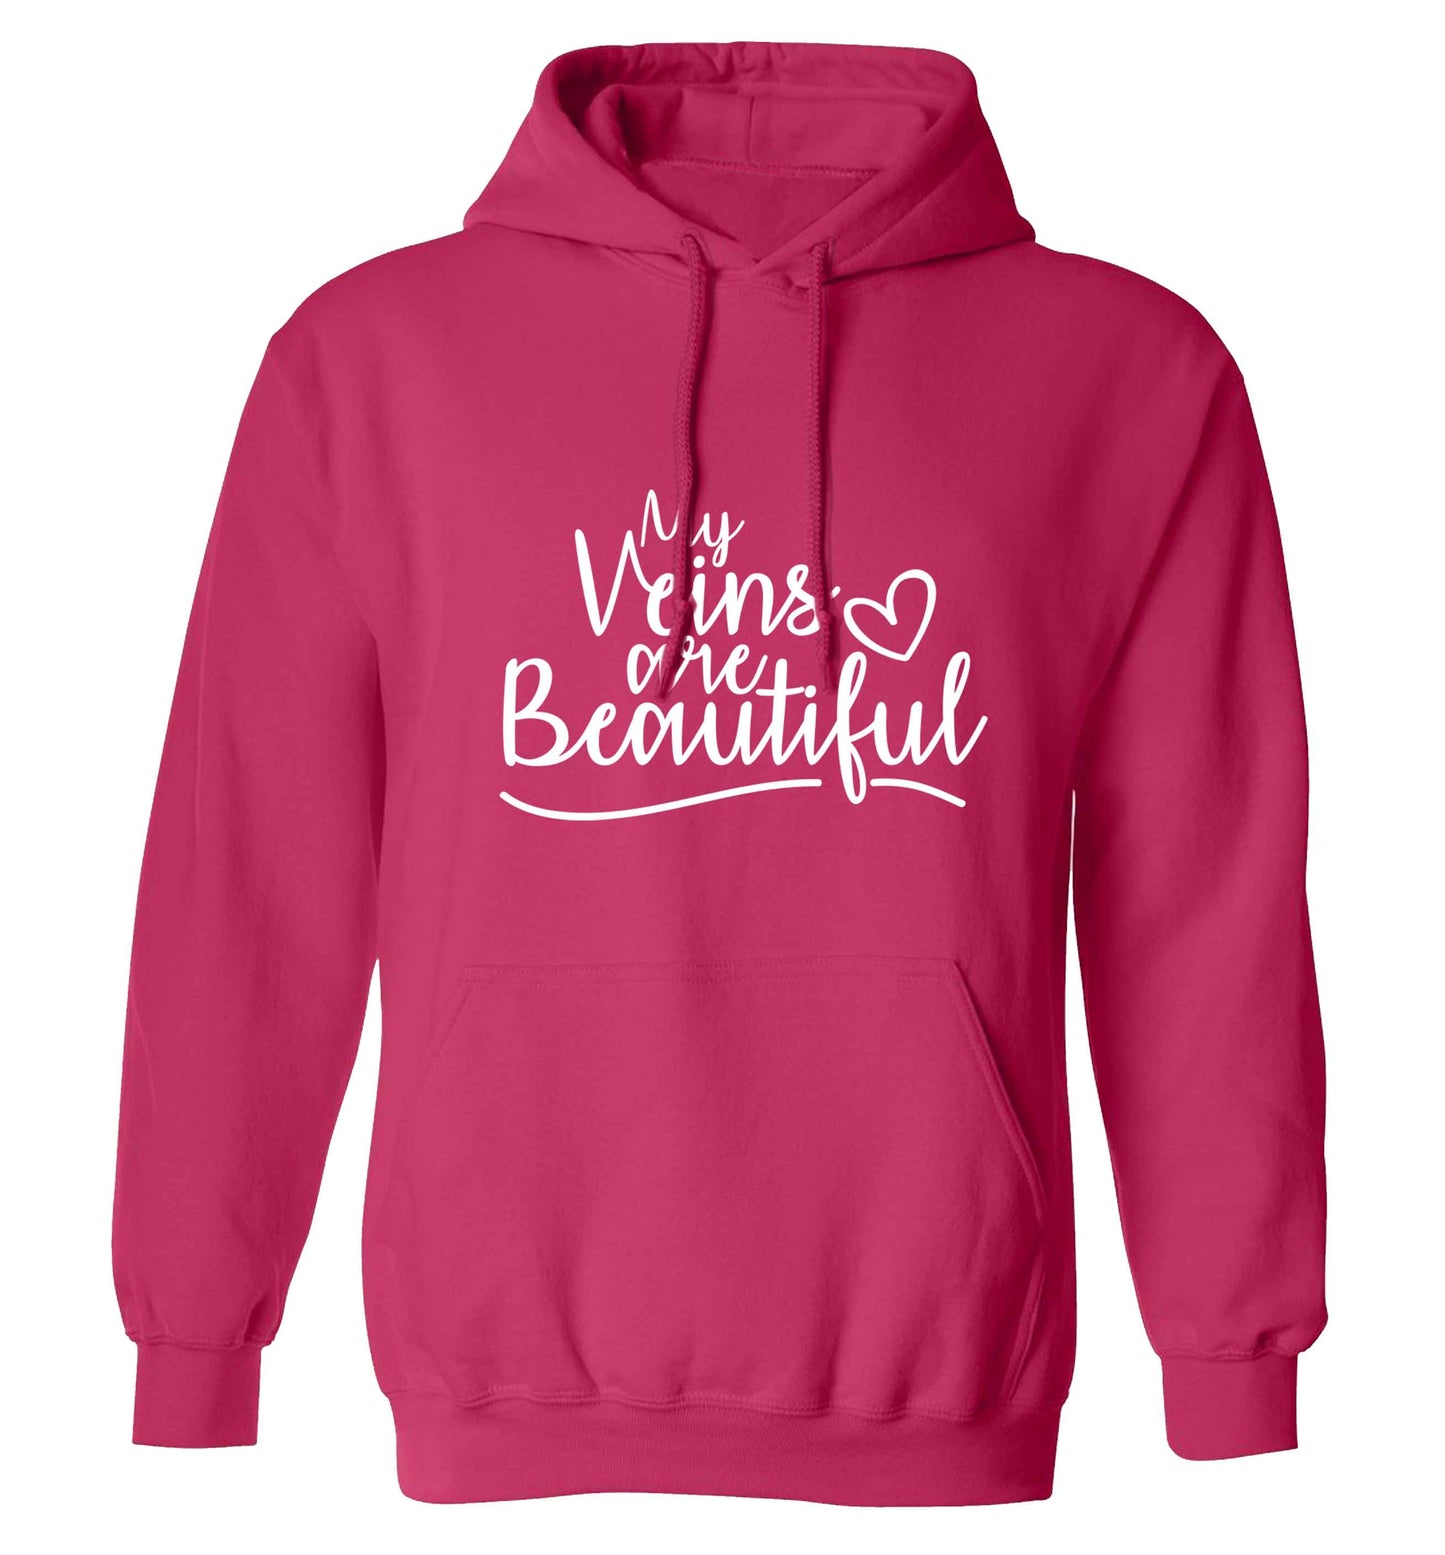 My Veins are Beautiful adults unisex pink hoodie 2XL